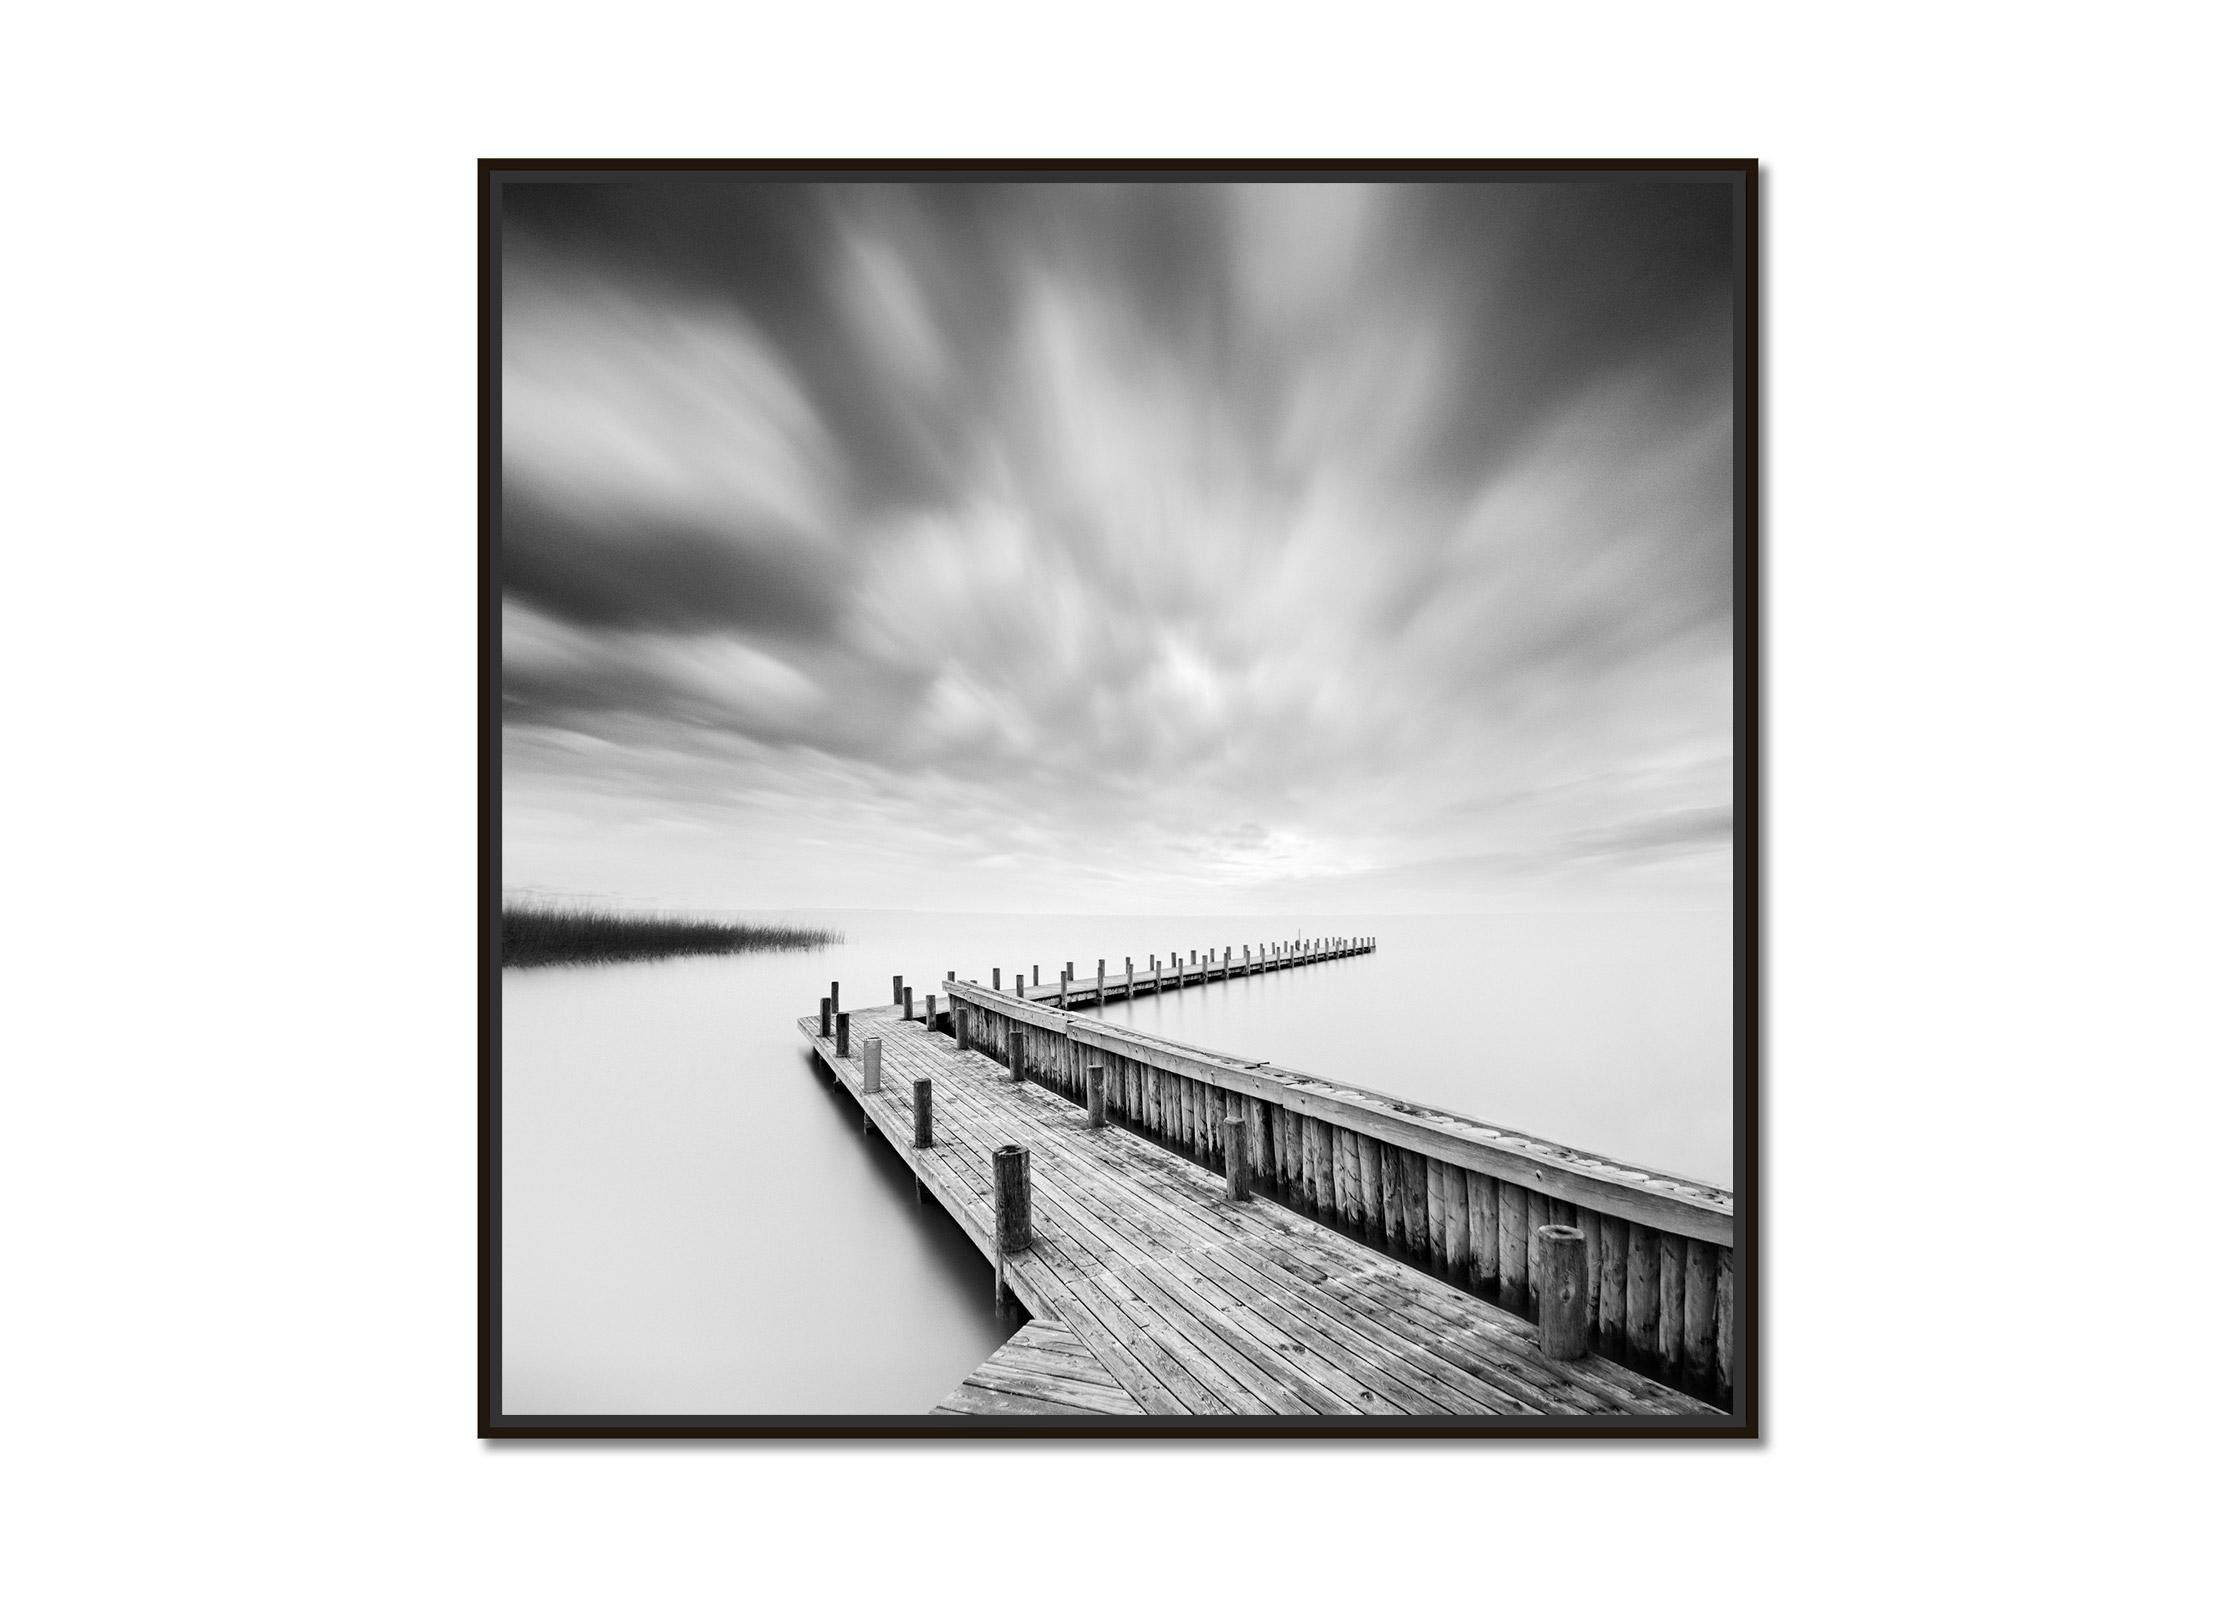 Wood Pier, Lake, Storm, Austria, black and white fine art photography landscapes - Photograph by Gerald Berghammer